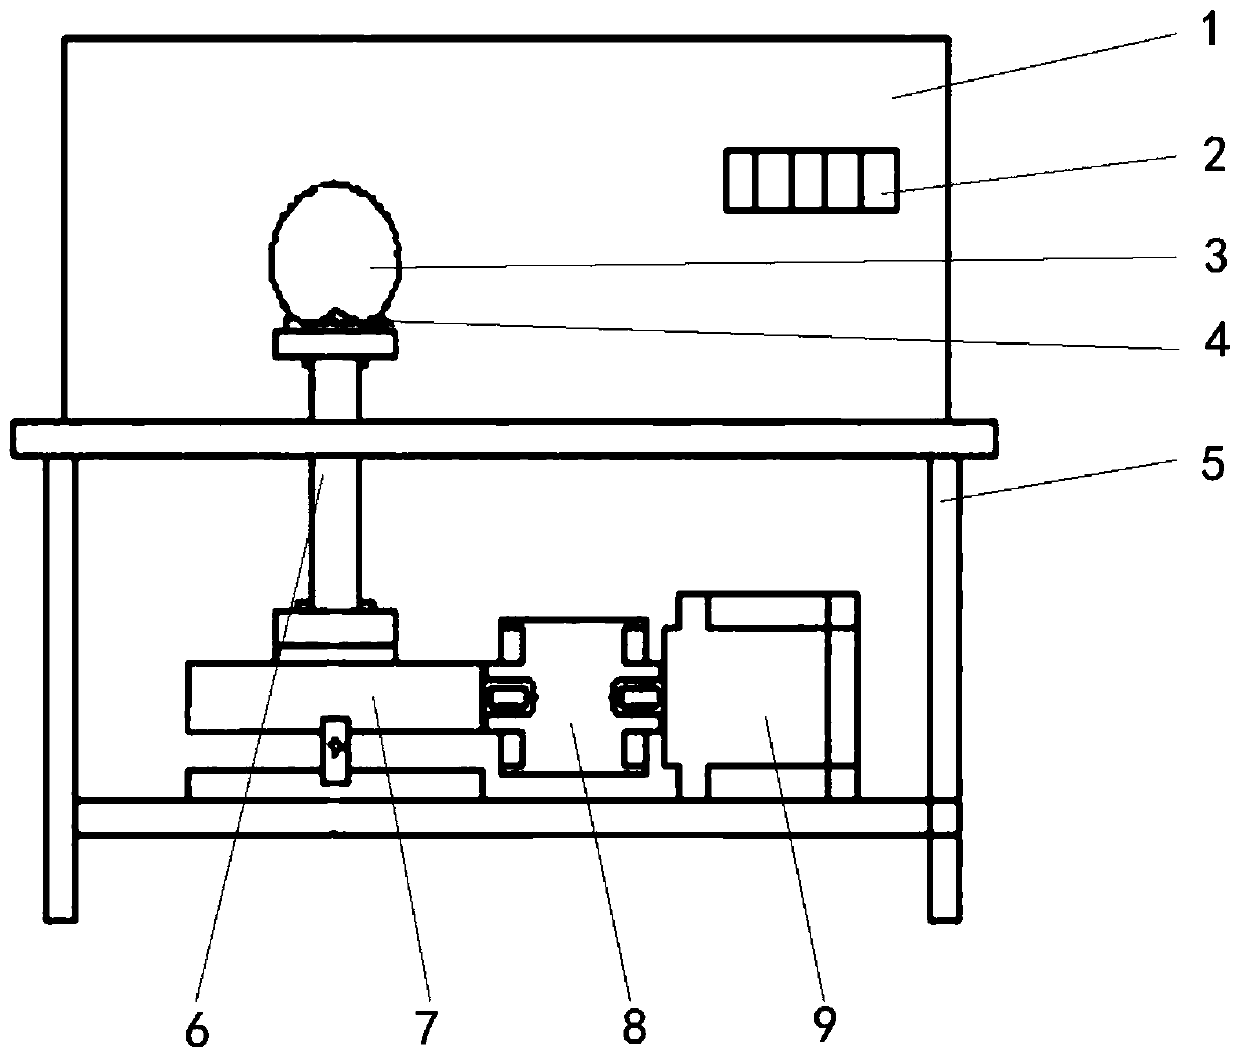 A rolling-sliding-torque experimental device